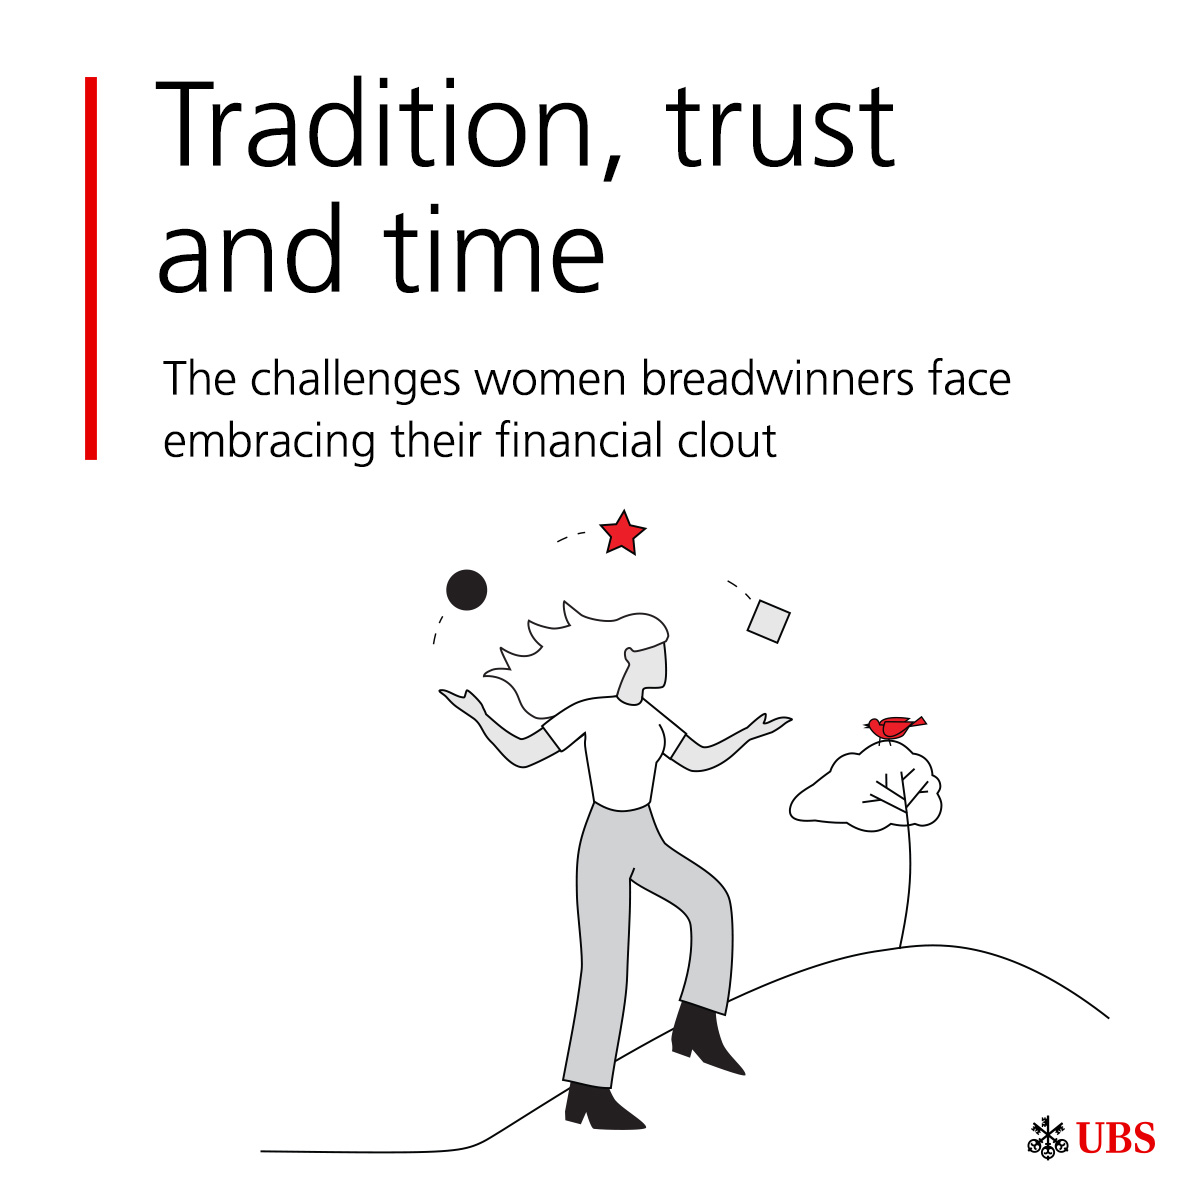 Our 6th annual #OwnYourWorth report looks at how women who are primary breadwinners make decisions about the money they earn and finds that only half are very engaged in financial decision-making. Download the full report here: from.ubs/6016glKjs #shareUBS